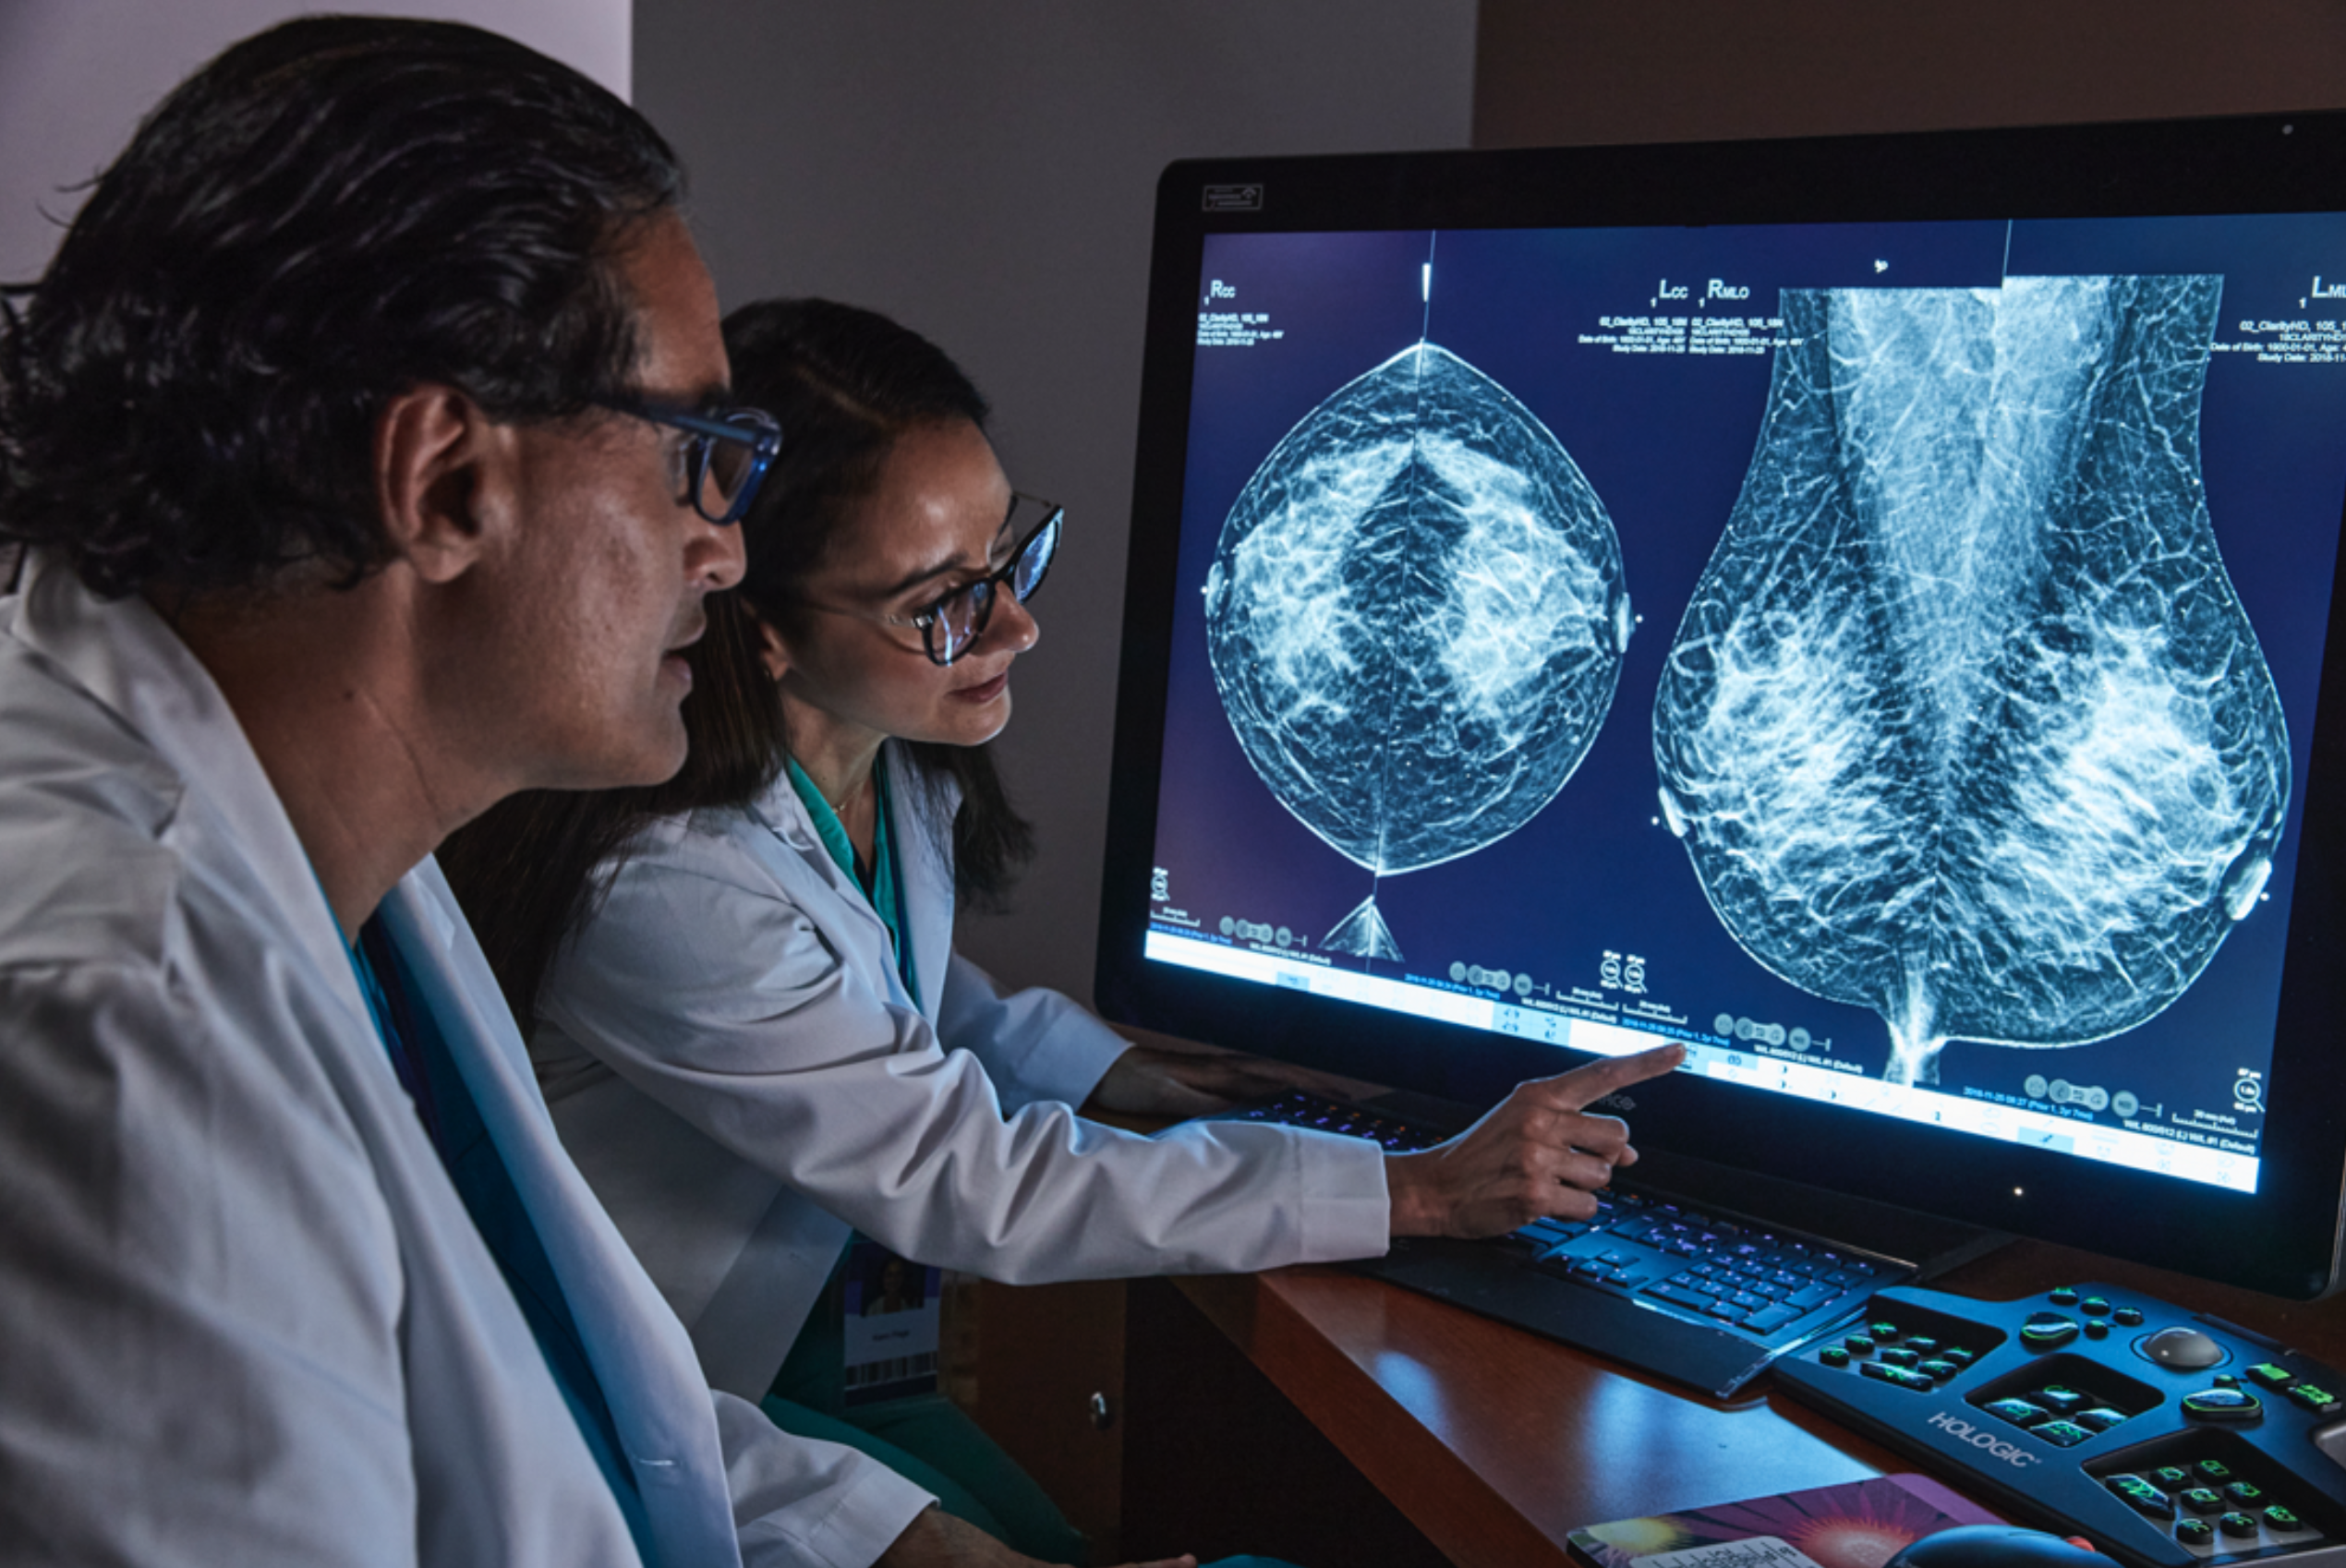 Through DBT, medical technology has been able to pave a new path and provide a launch board for AI and other technologies that can use its high-resolution images